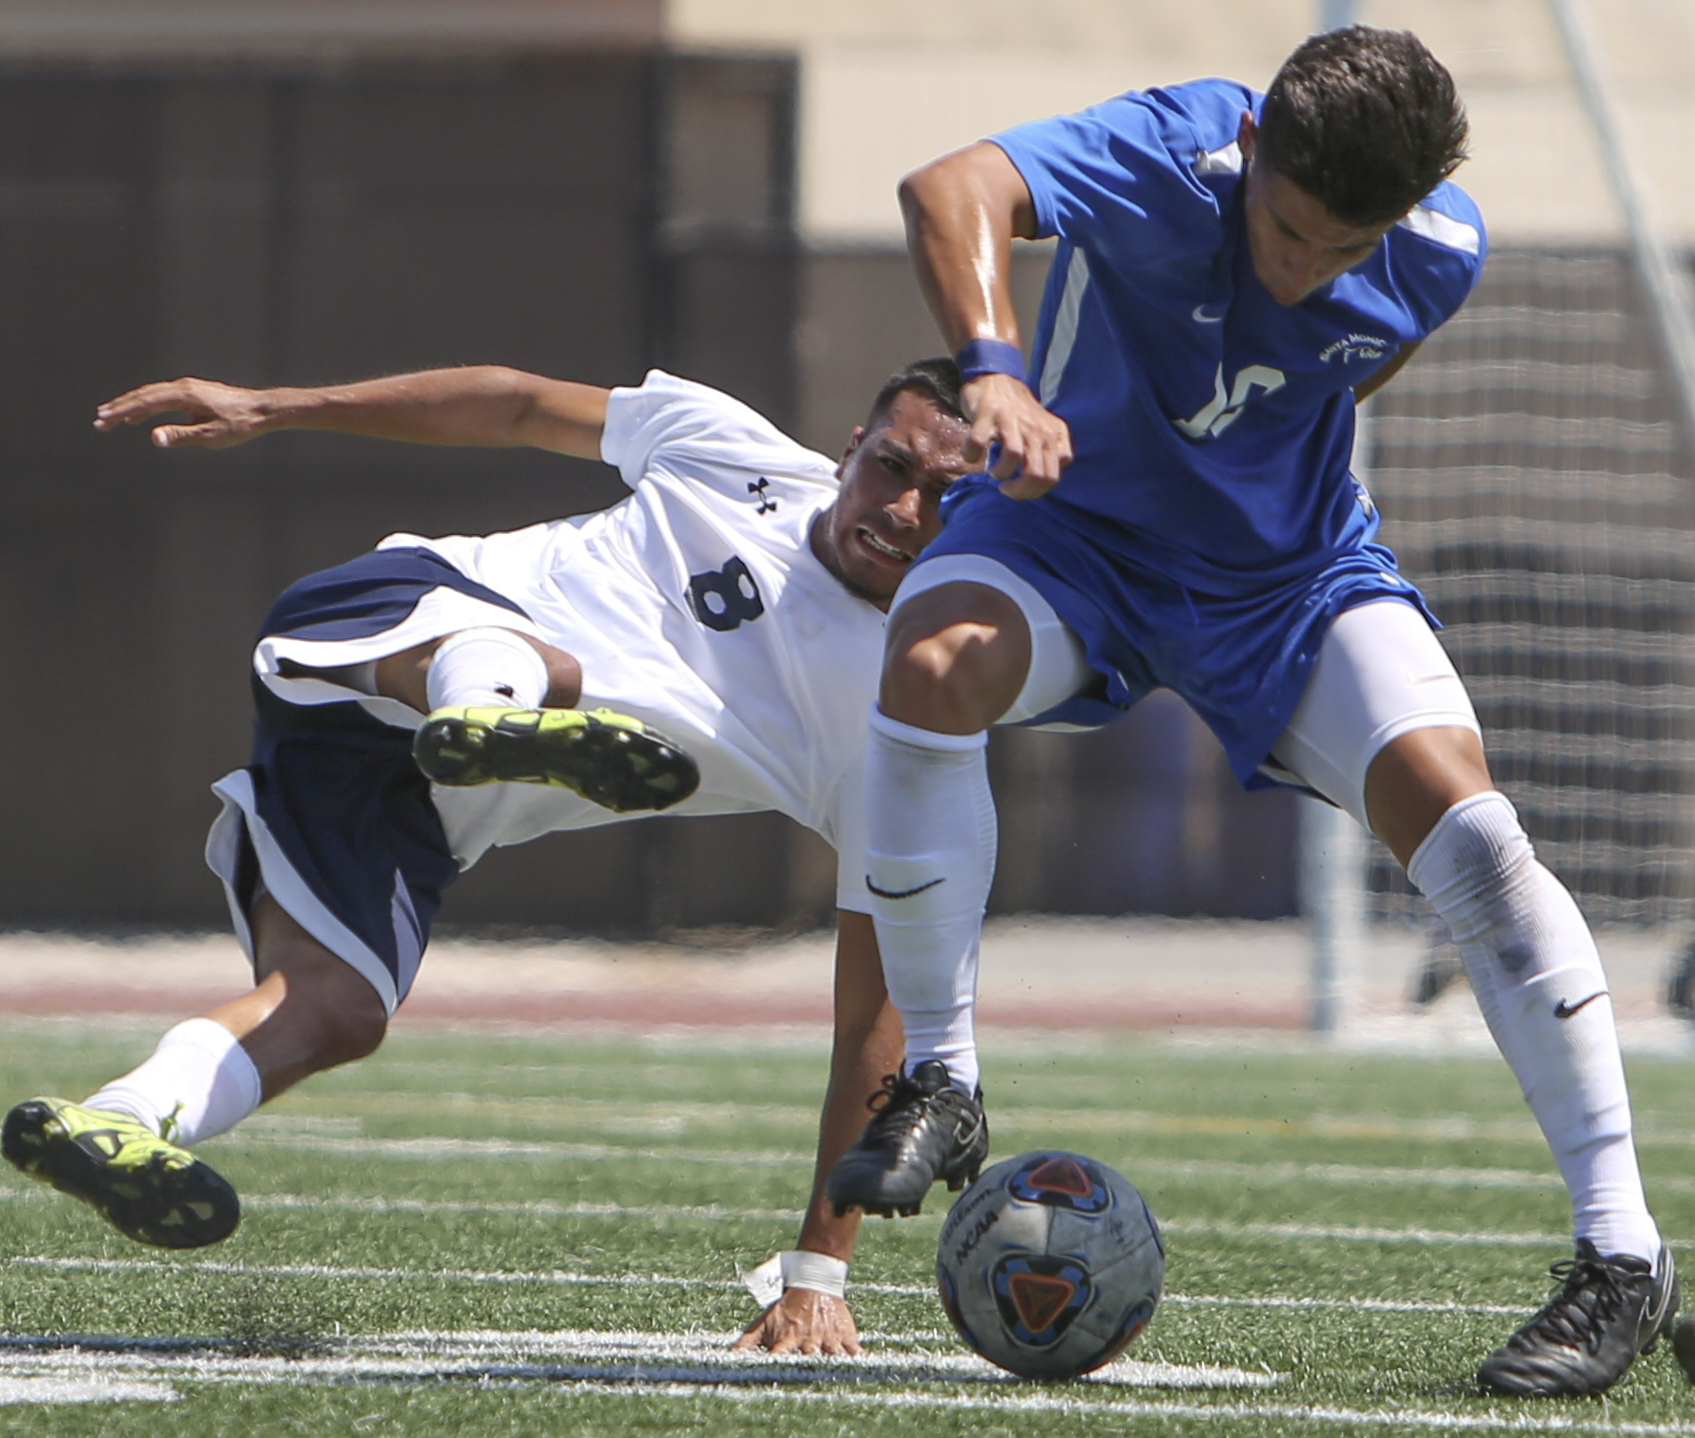  Oscar Palacios (10) of the Santa Monica College Corsairs mens soccer team fights for possesion of the ball against Everardo Candelas (8) of the El Camino College Warriors, Friday, September 1st, 2017, at the Santa Monica College Main Campus field in